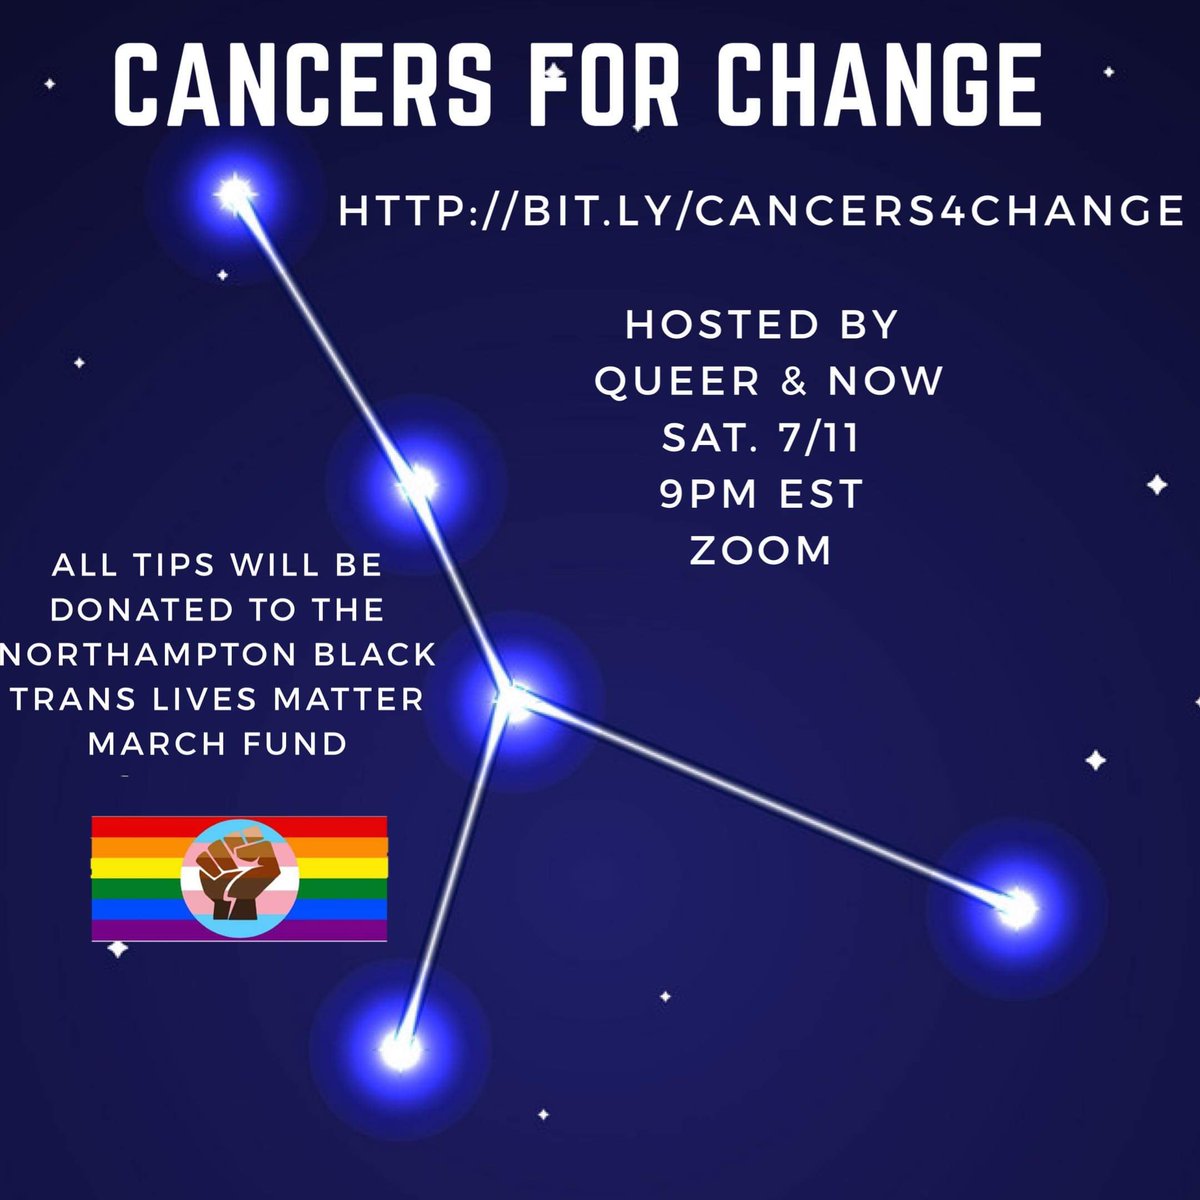 THIS SATURDAY 😍 catch some drag and burlesque for a good cause !
#queerandnow #cancerseason #zoom #virtualdrag #virtualburlesque #burlesque #burlesqueartist #dragandburlesque #bushwickartist #nycartist #westernmassartists #blacktranslivesmatter #northamptonma